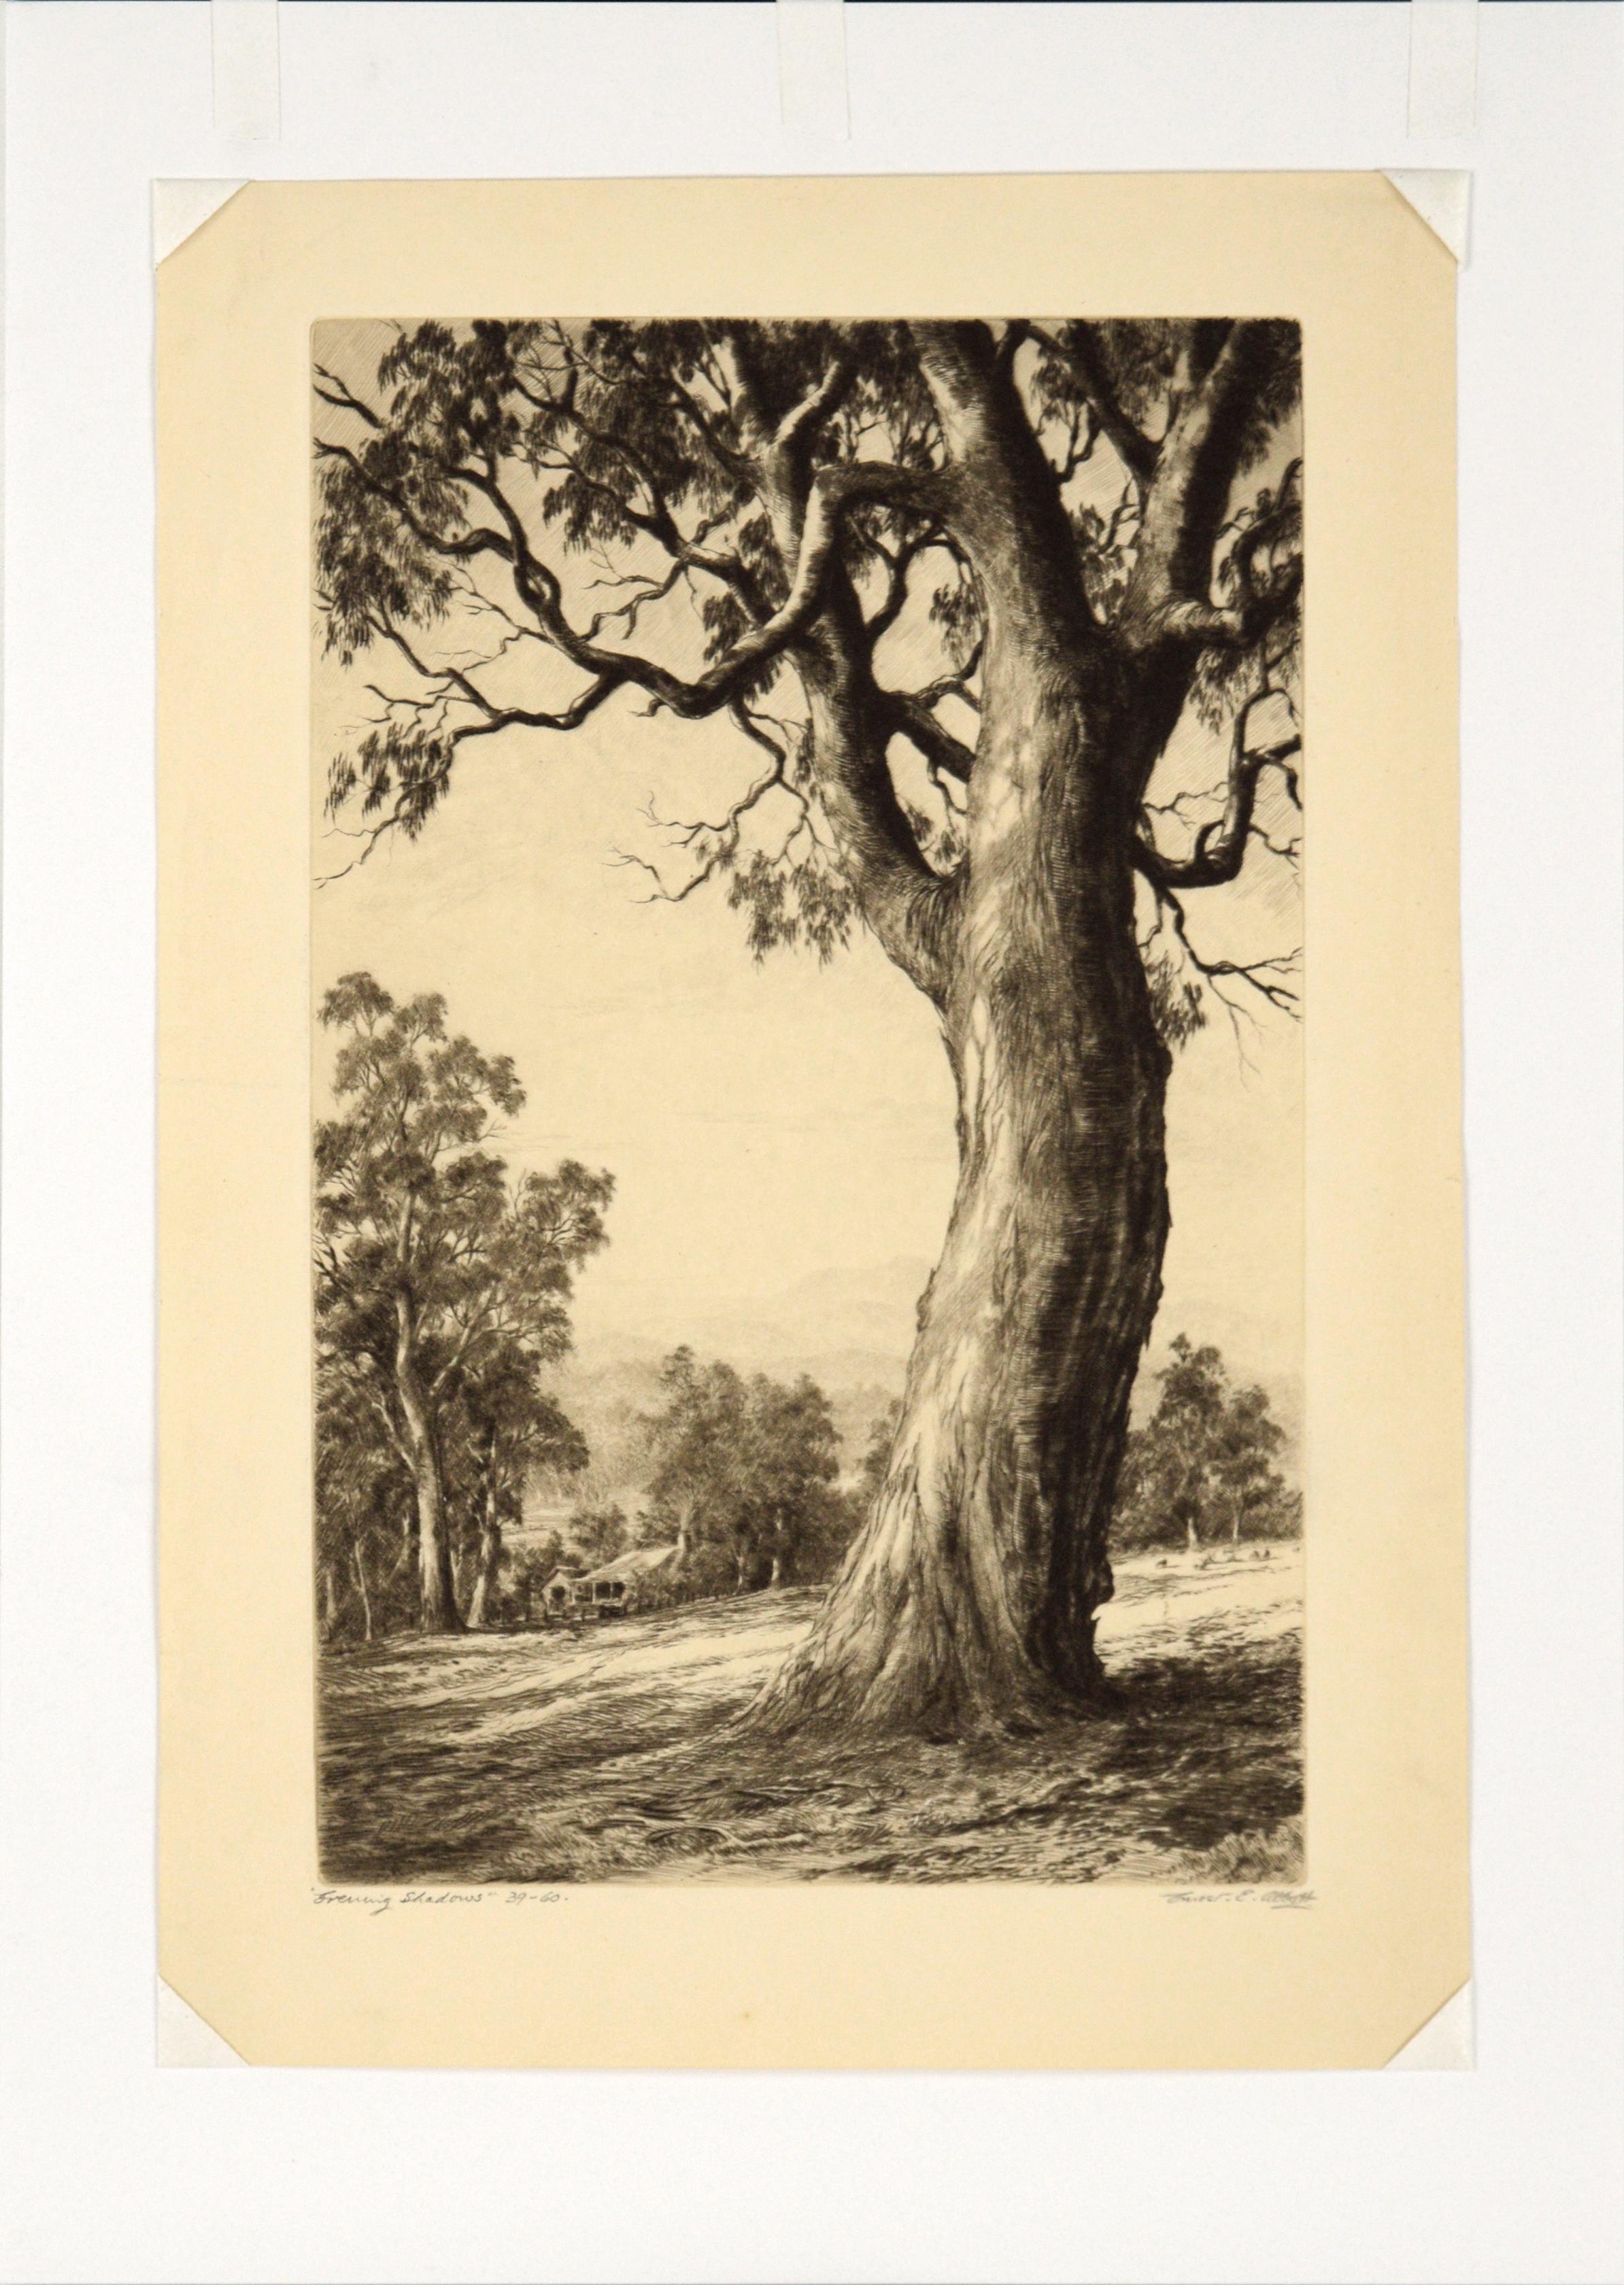 Early 20th century landscape etching of a detailed, idyllic scene with a tall tree in the foreground by Ernest Edwin Abbott (Australian, 1888-1973). Titled (